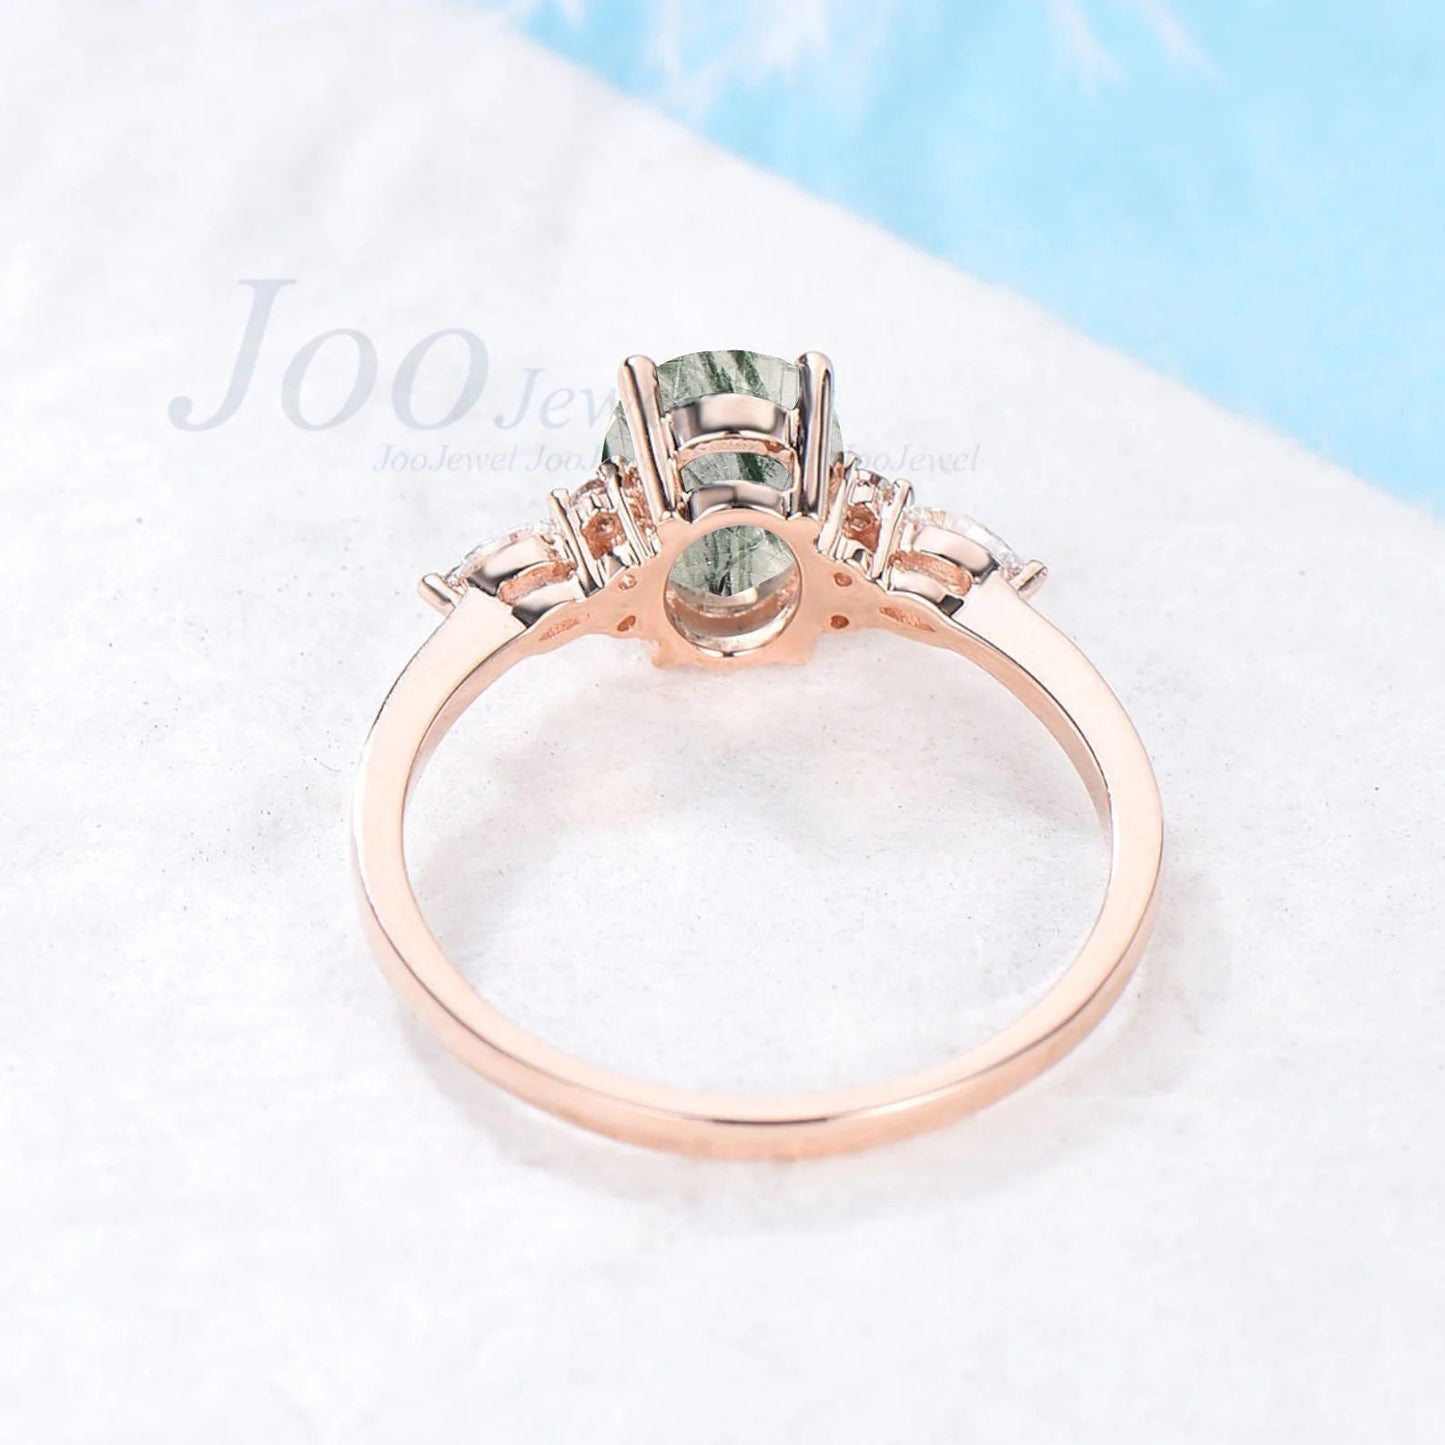 Natural Green Rutile Quartz Ring Sterling Silver Oval Engagement Ring Green Quartz Crystal Ring Heal Energy Gem Ring Jewelry Gift For Women